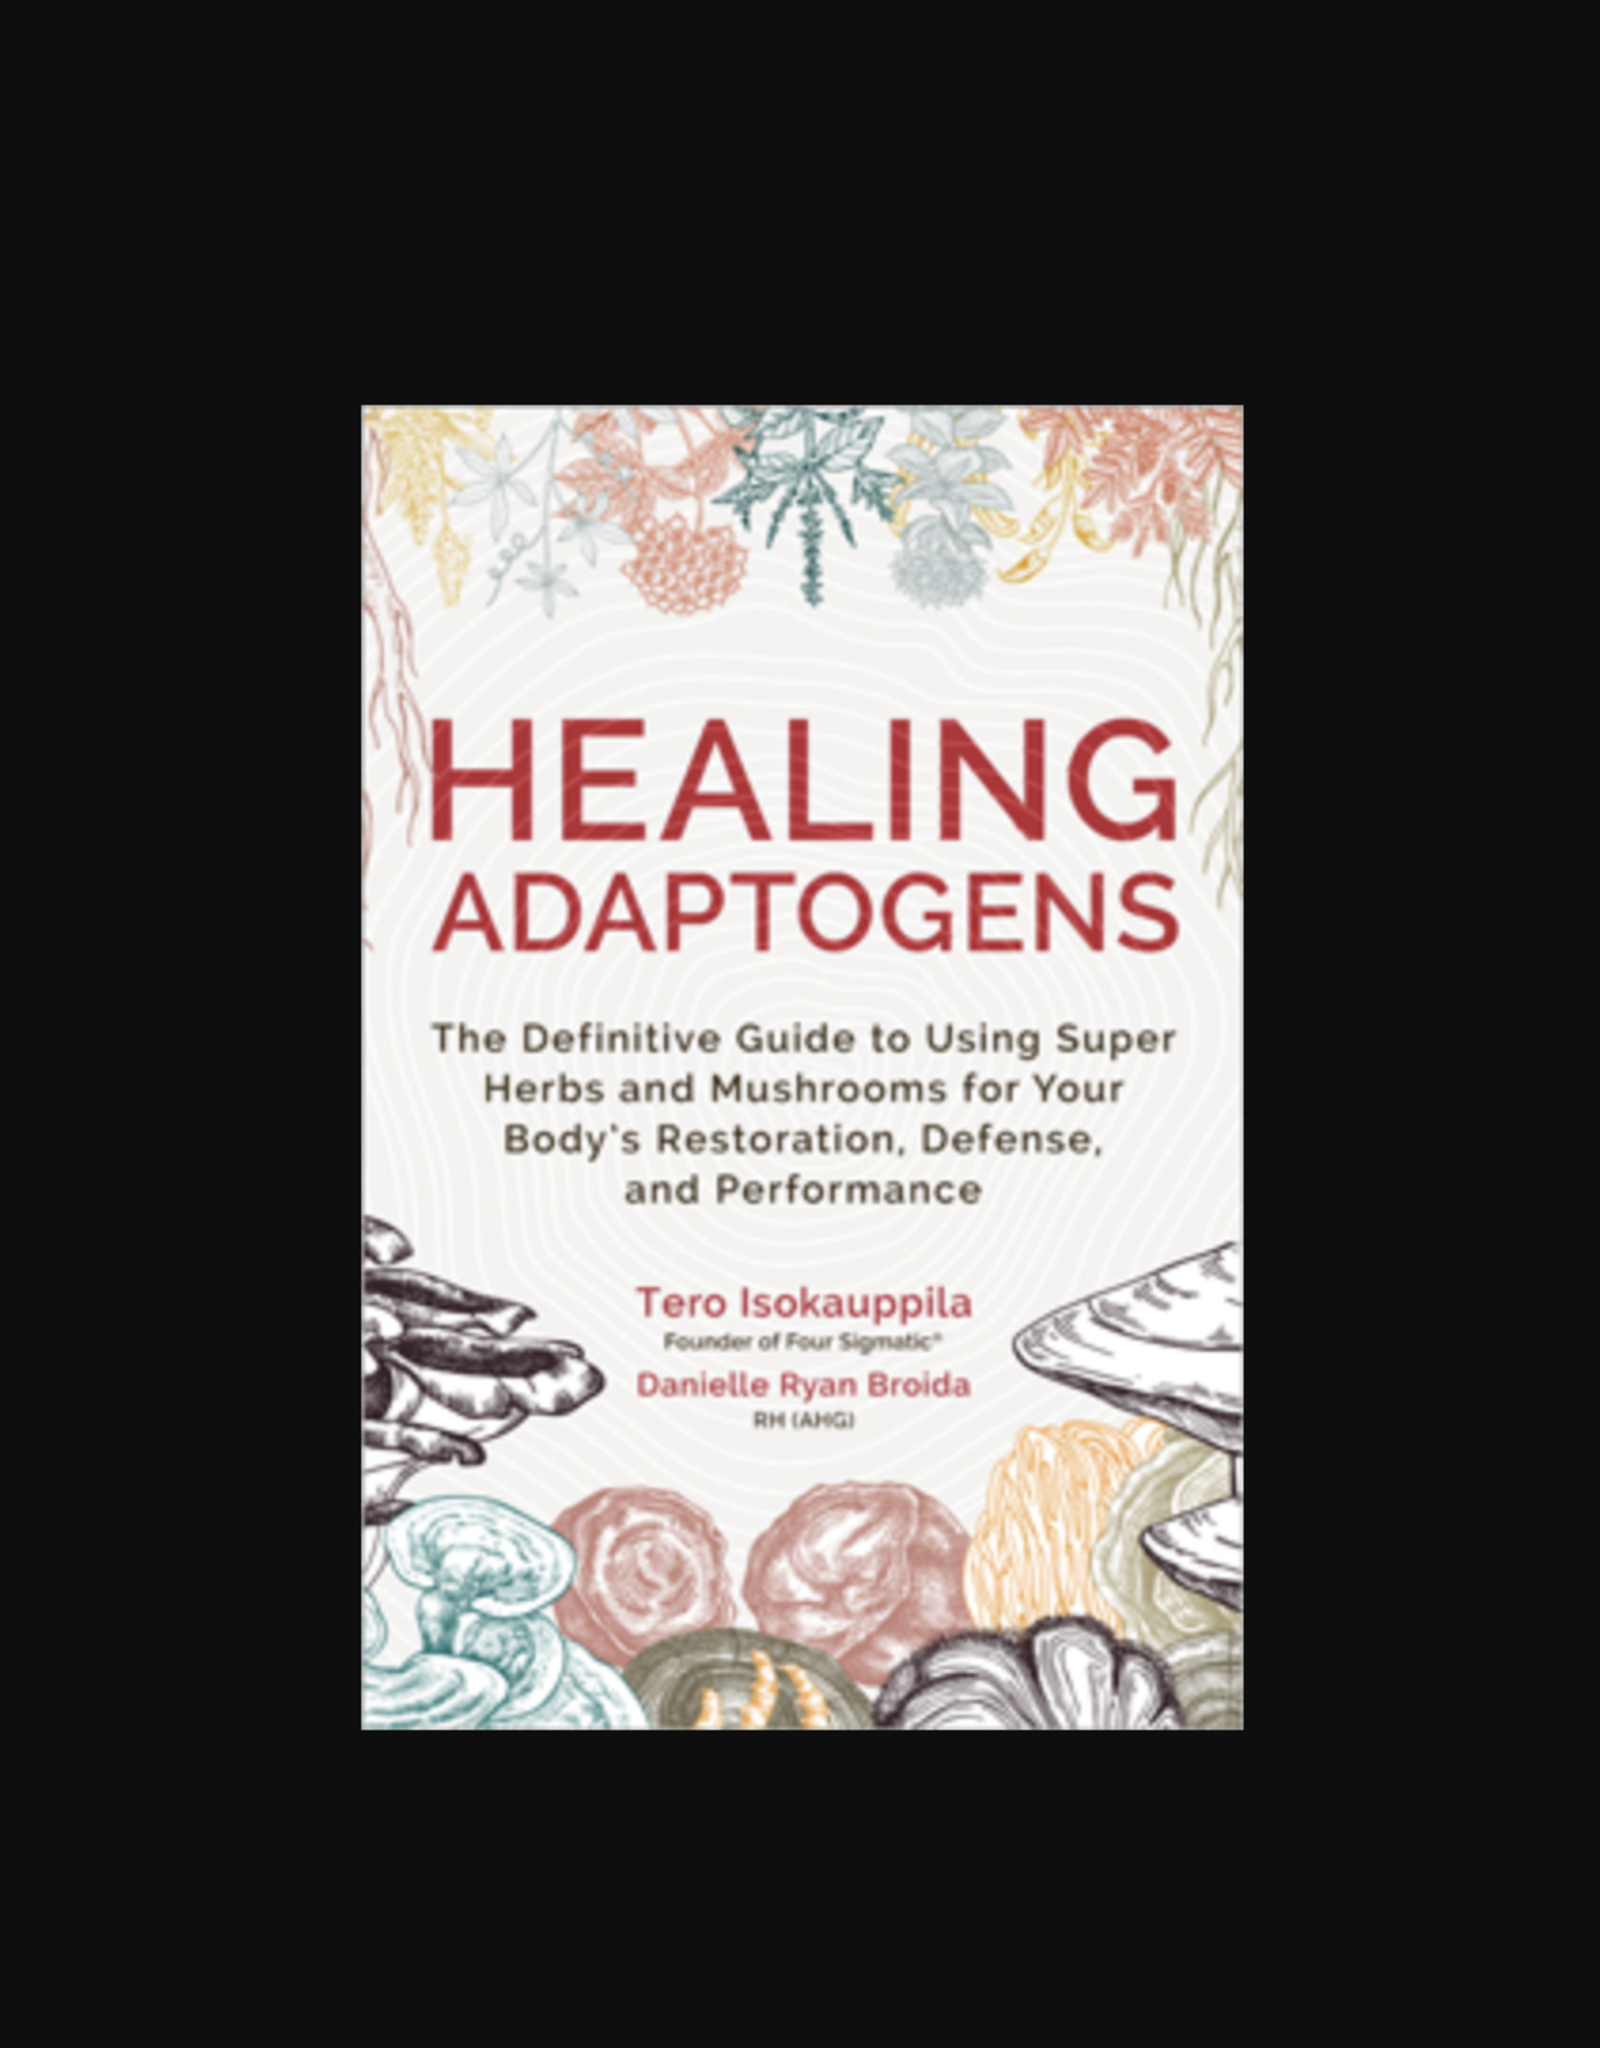 Healing Adaptogens (Hardcover) - The Definitive Guide to Using Super Herbs and Mushrooms for Your Body's Restoration, Defense, and Performance